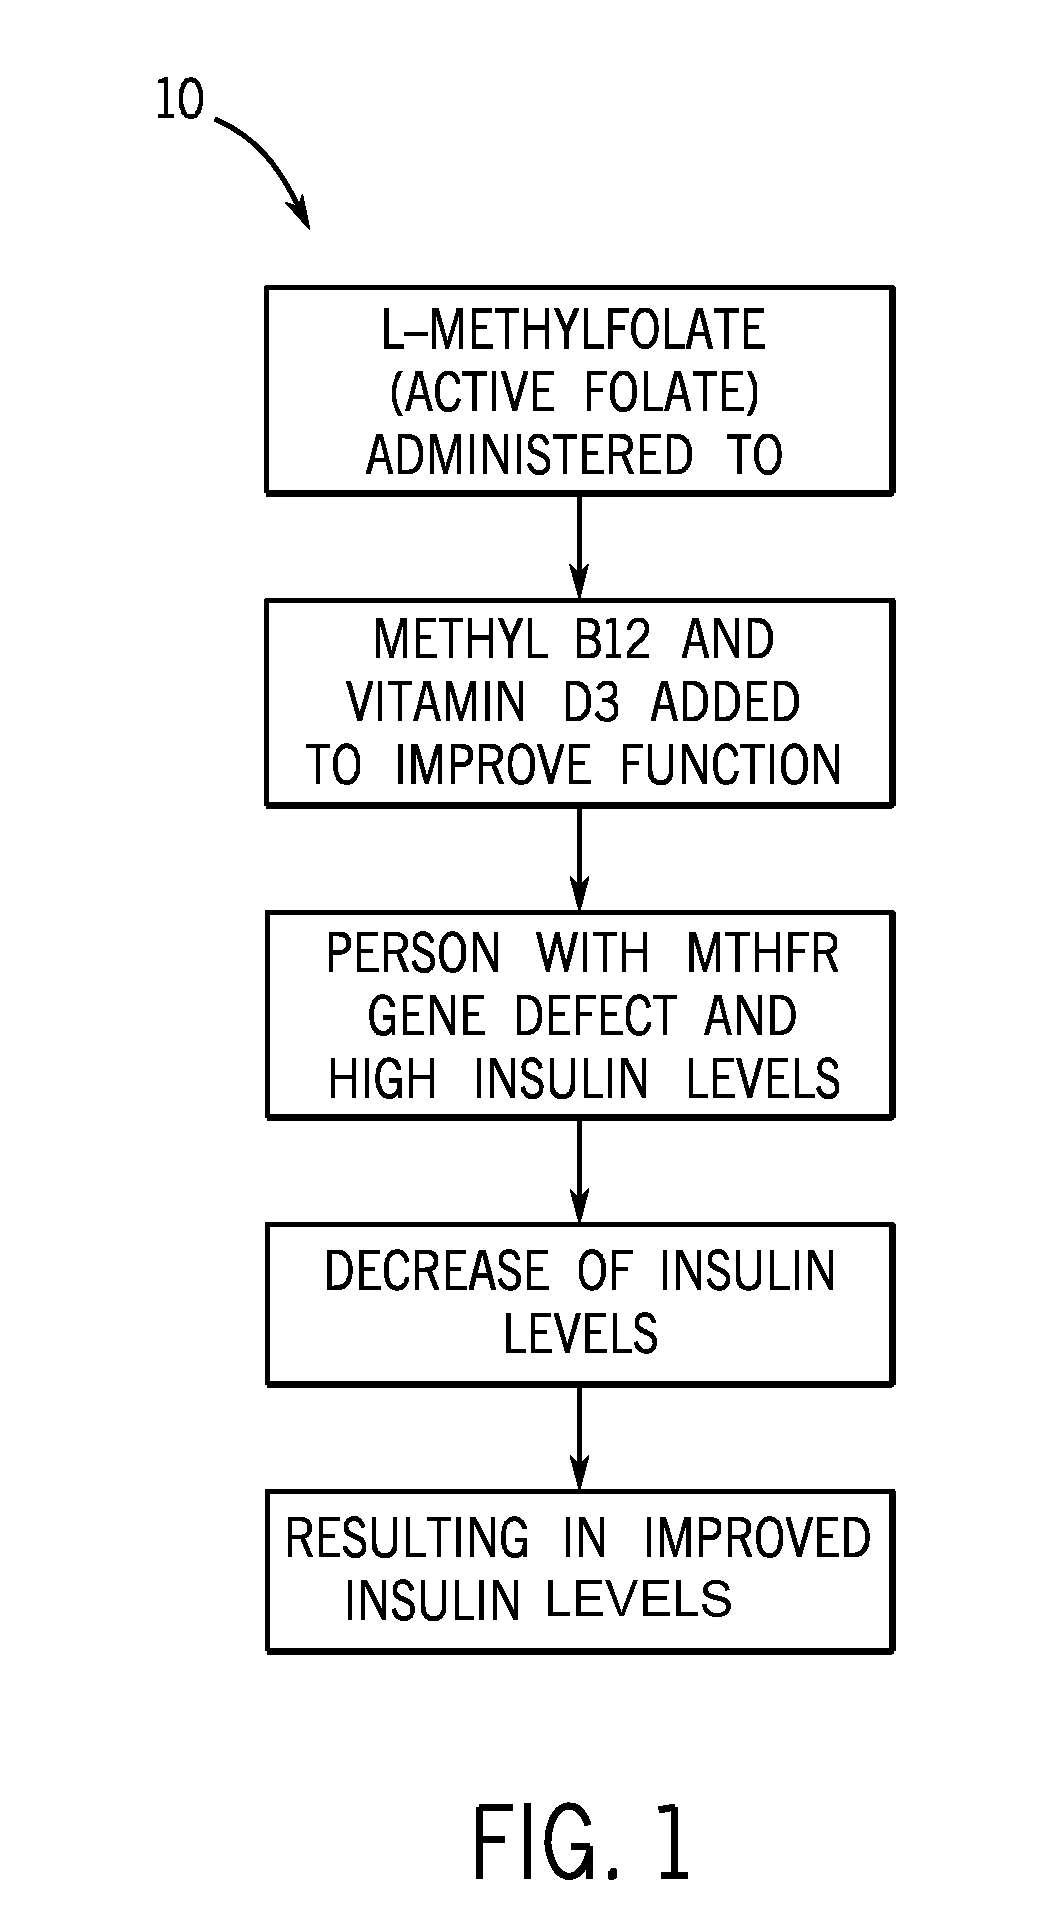 Method of reducing fasting insulin levels in mthfr gene deficient subjects with normal to slightly elevated hemoglobin a1c